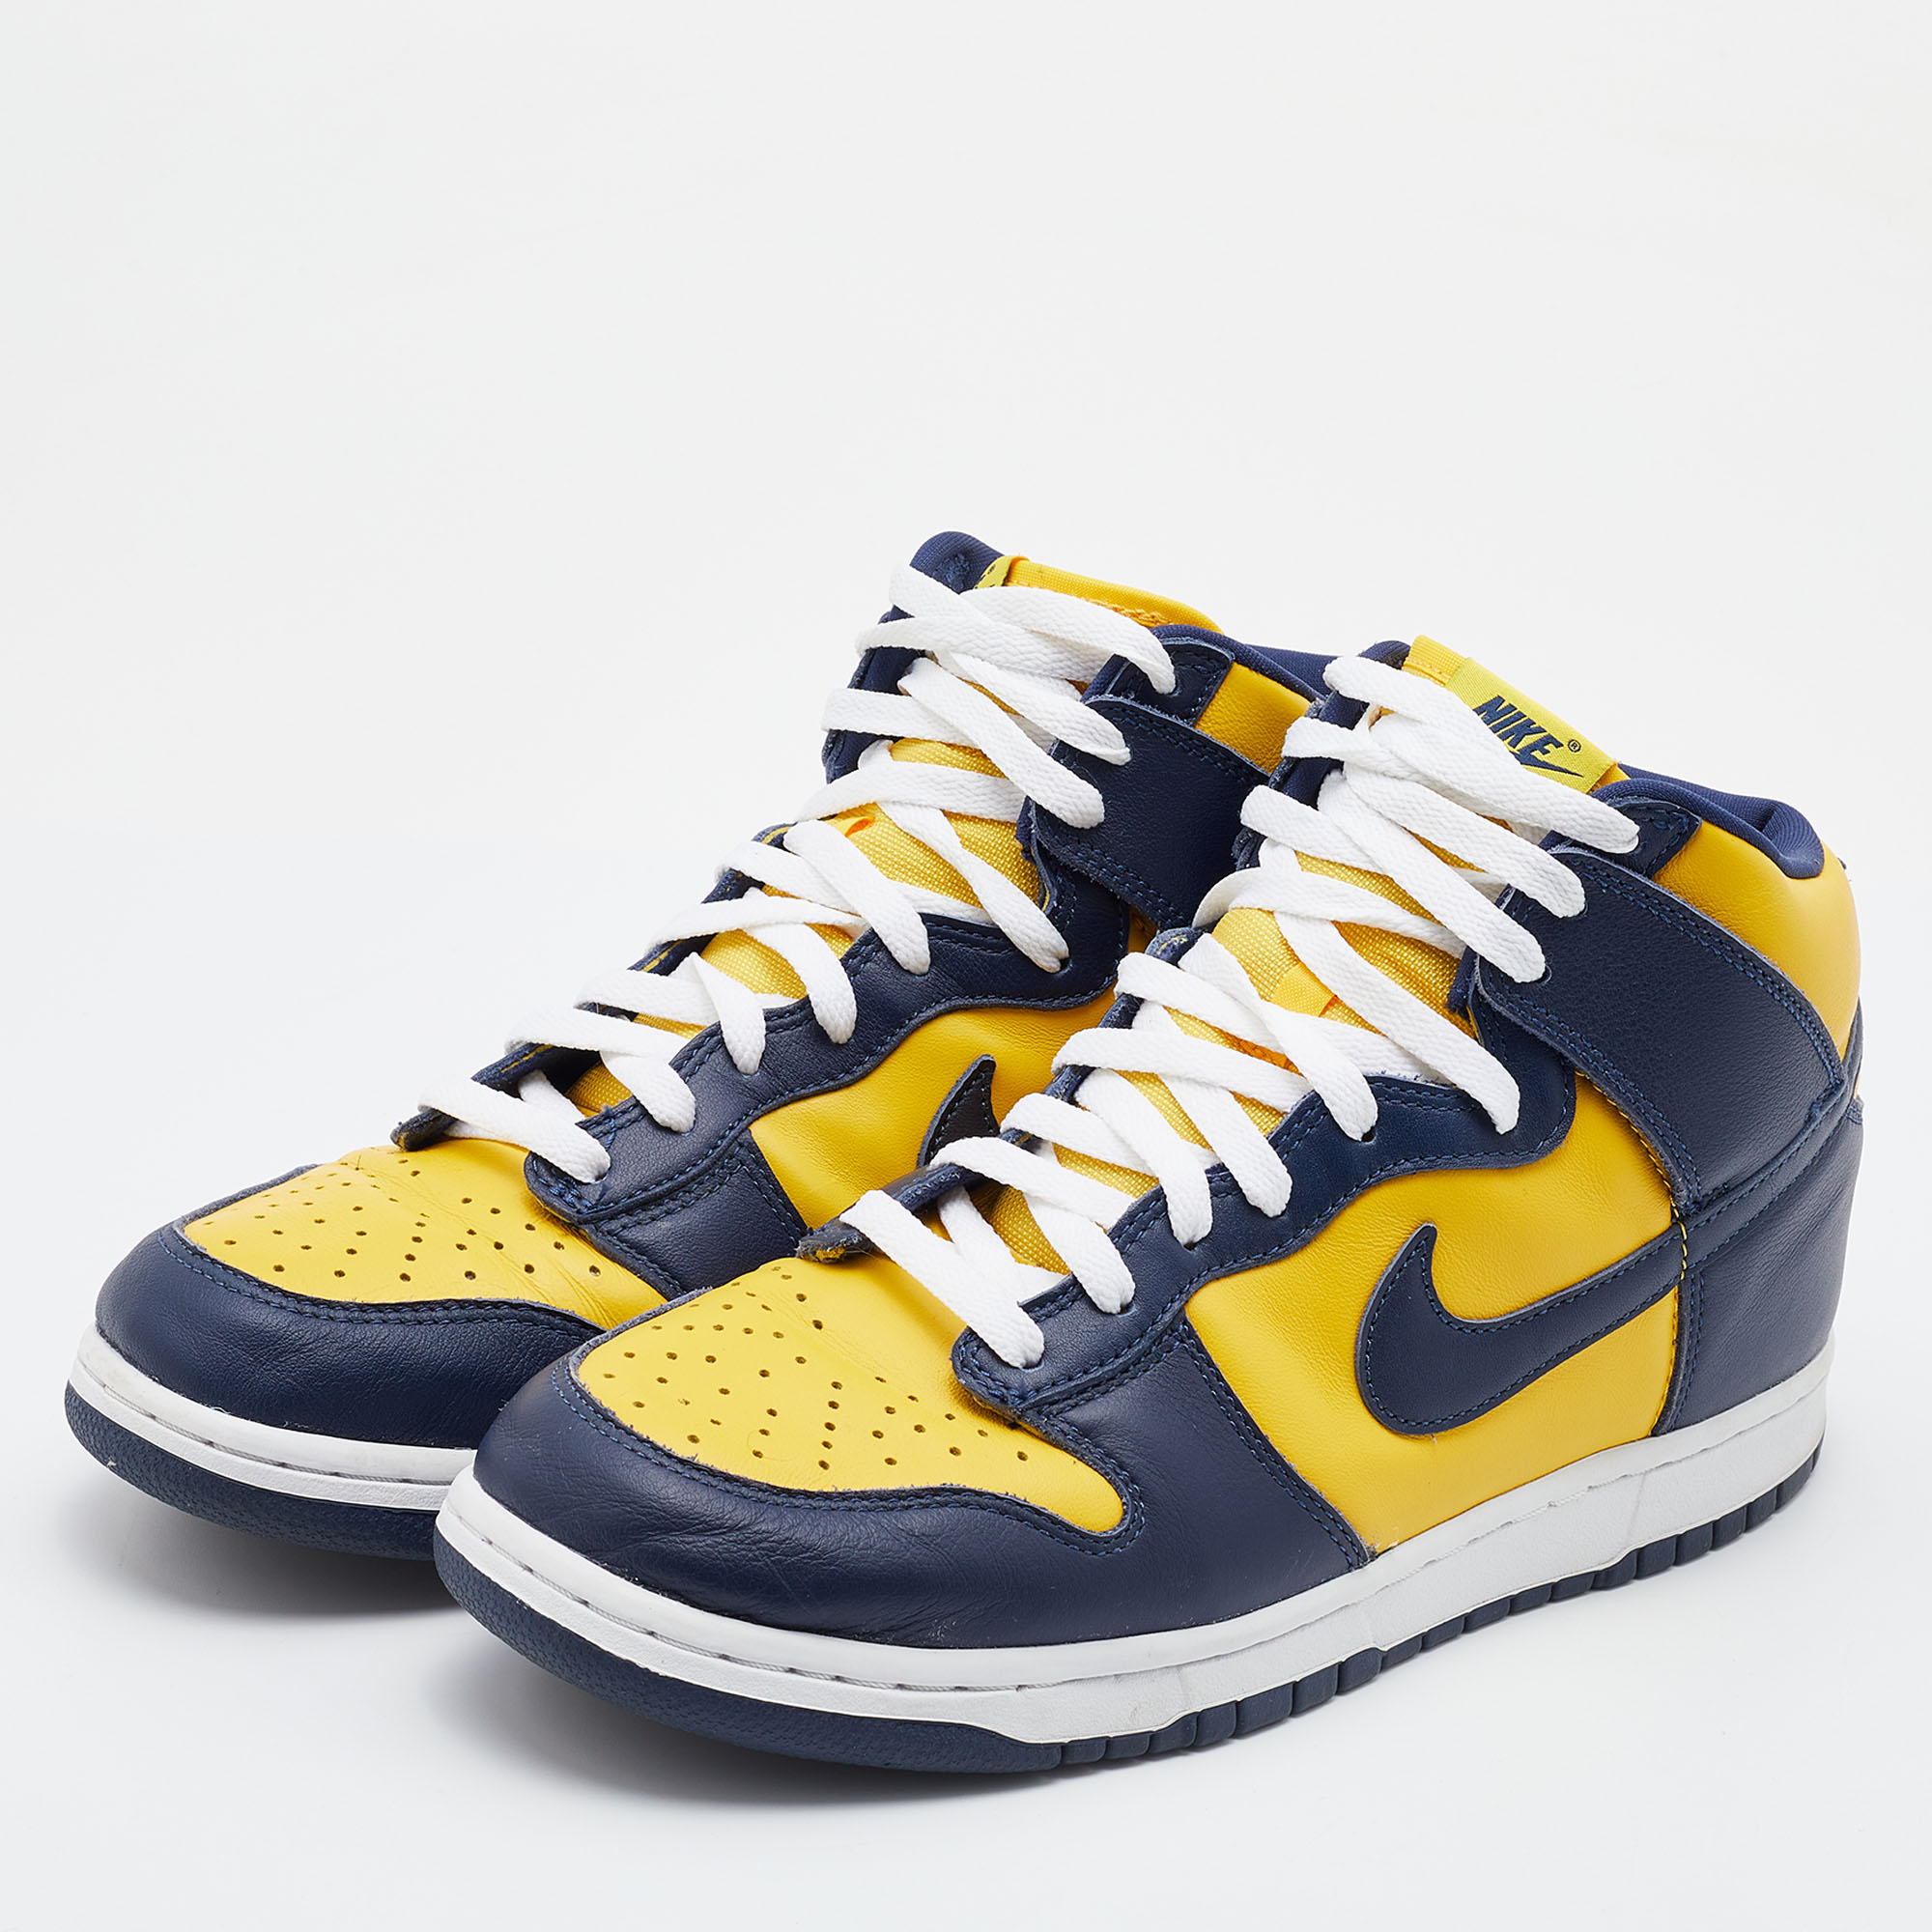 

Nike Blue/Yellow Leather Dunk Michigan High Top Sneakers Size